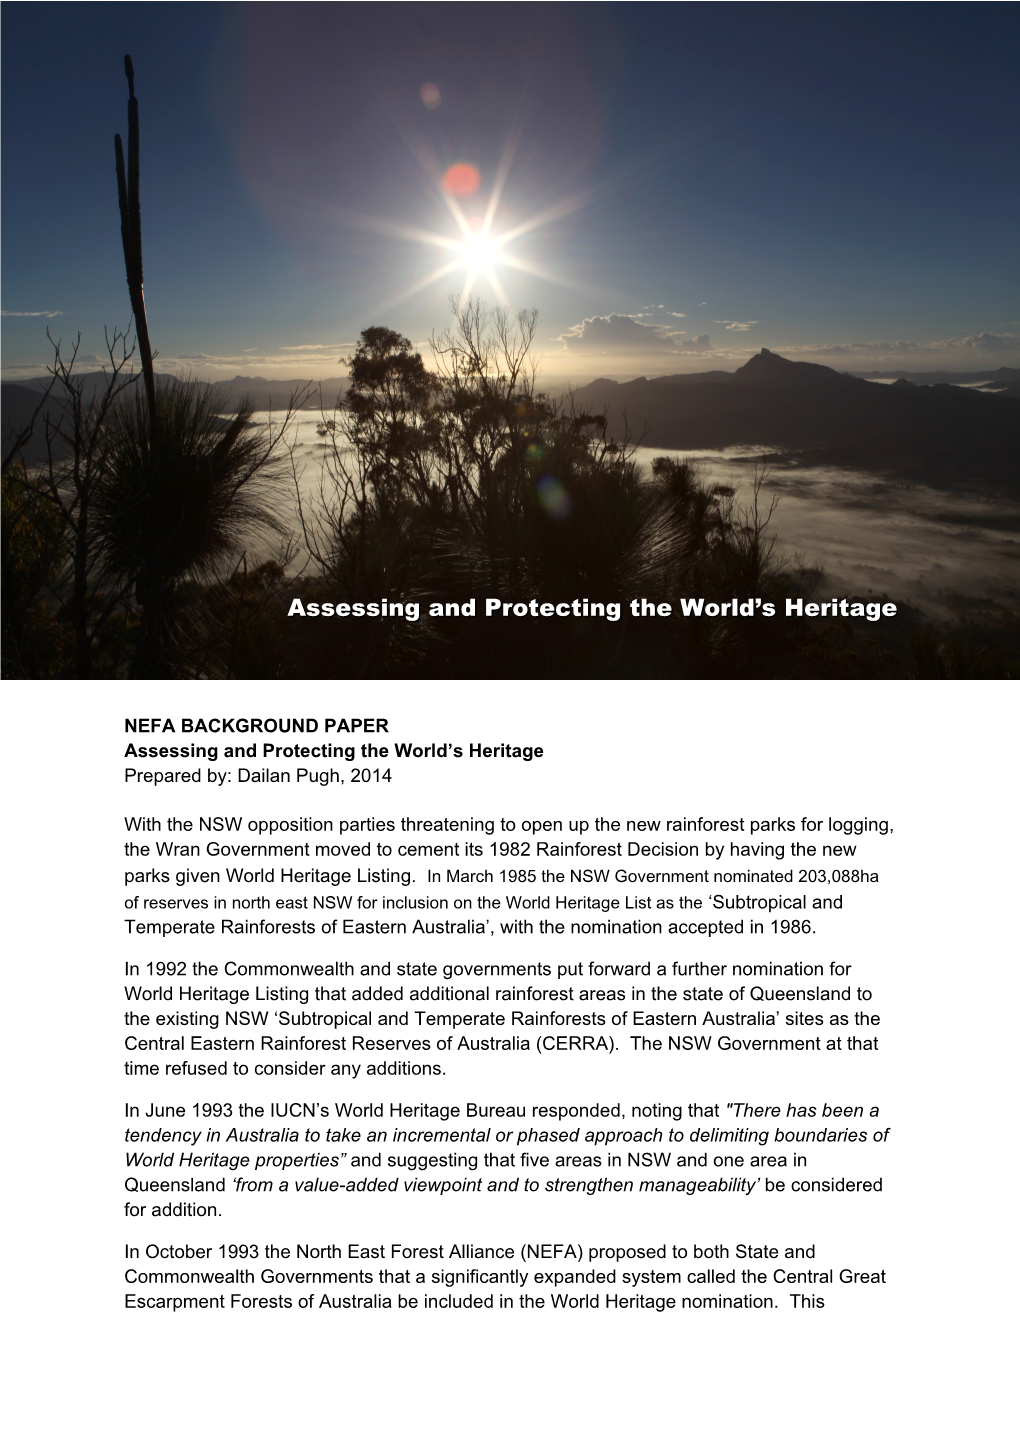 Assessing and Protecting the World's Heritage